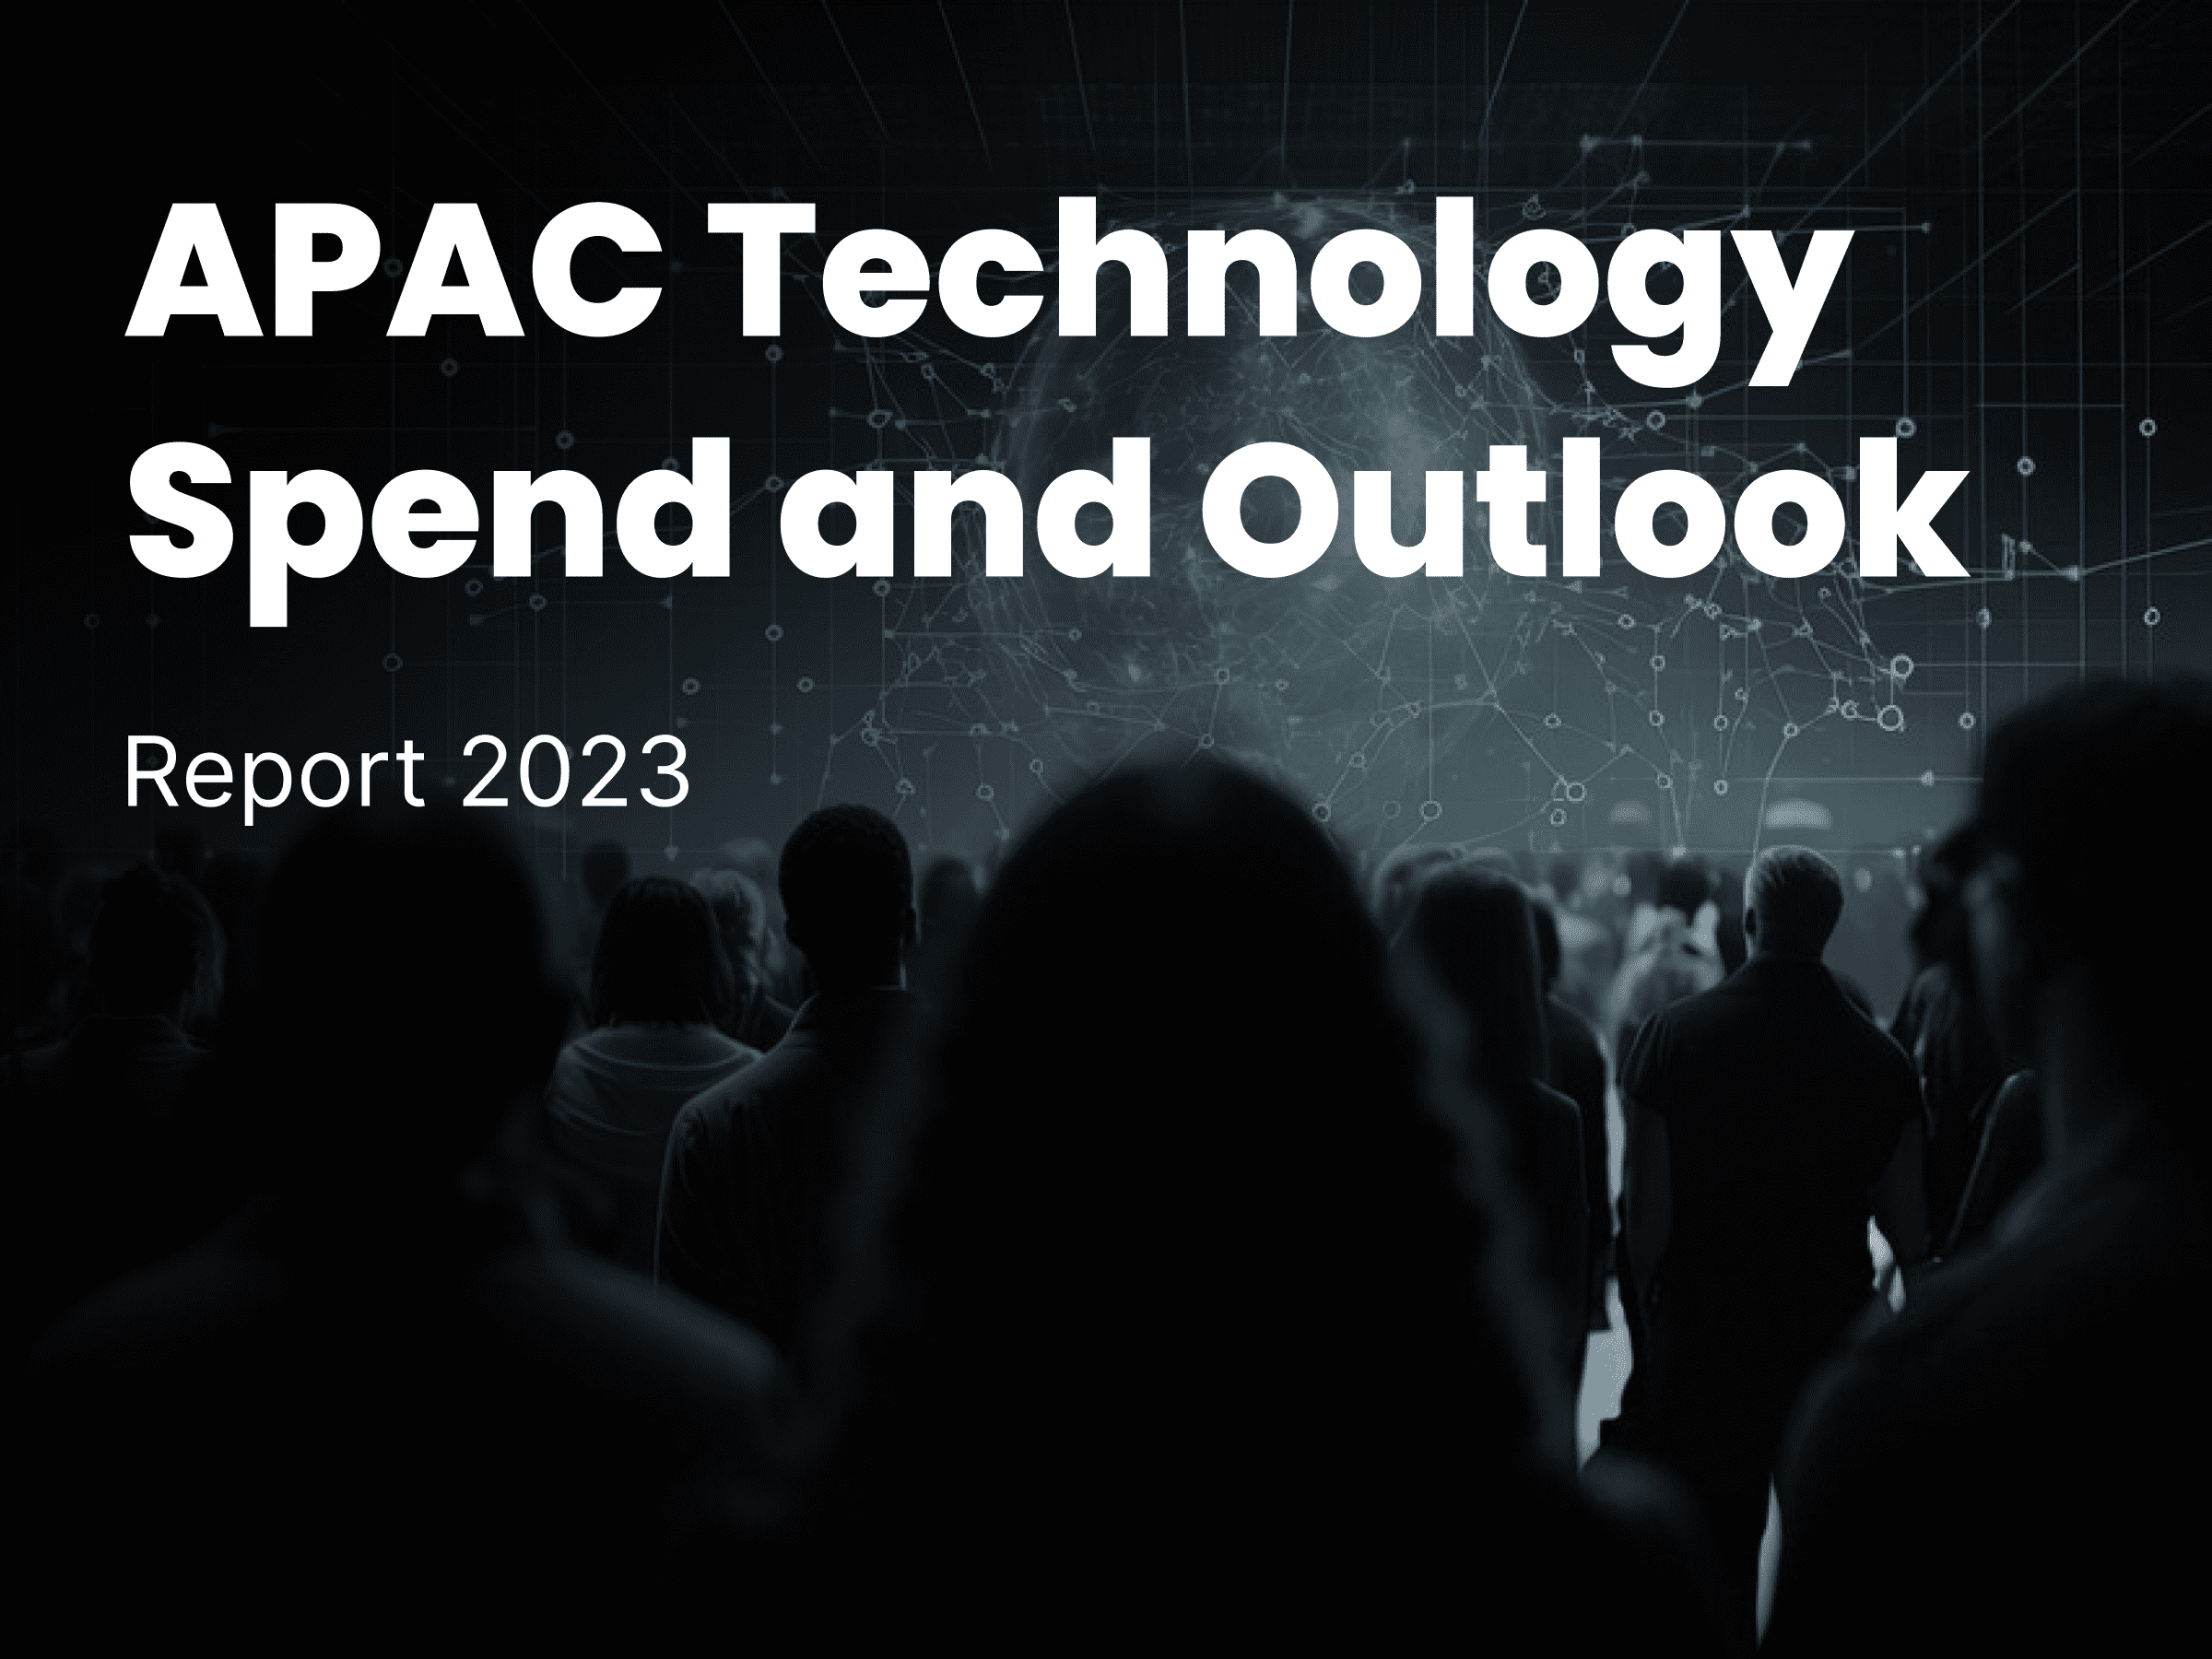 APAC Technology Spend and Outlook Report